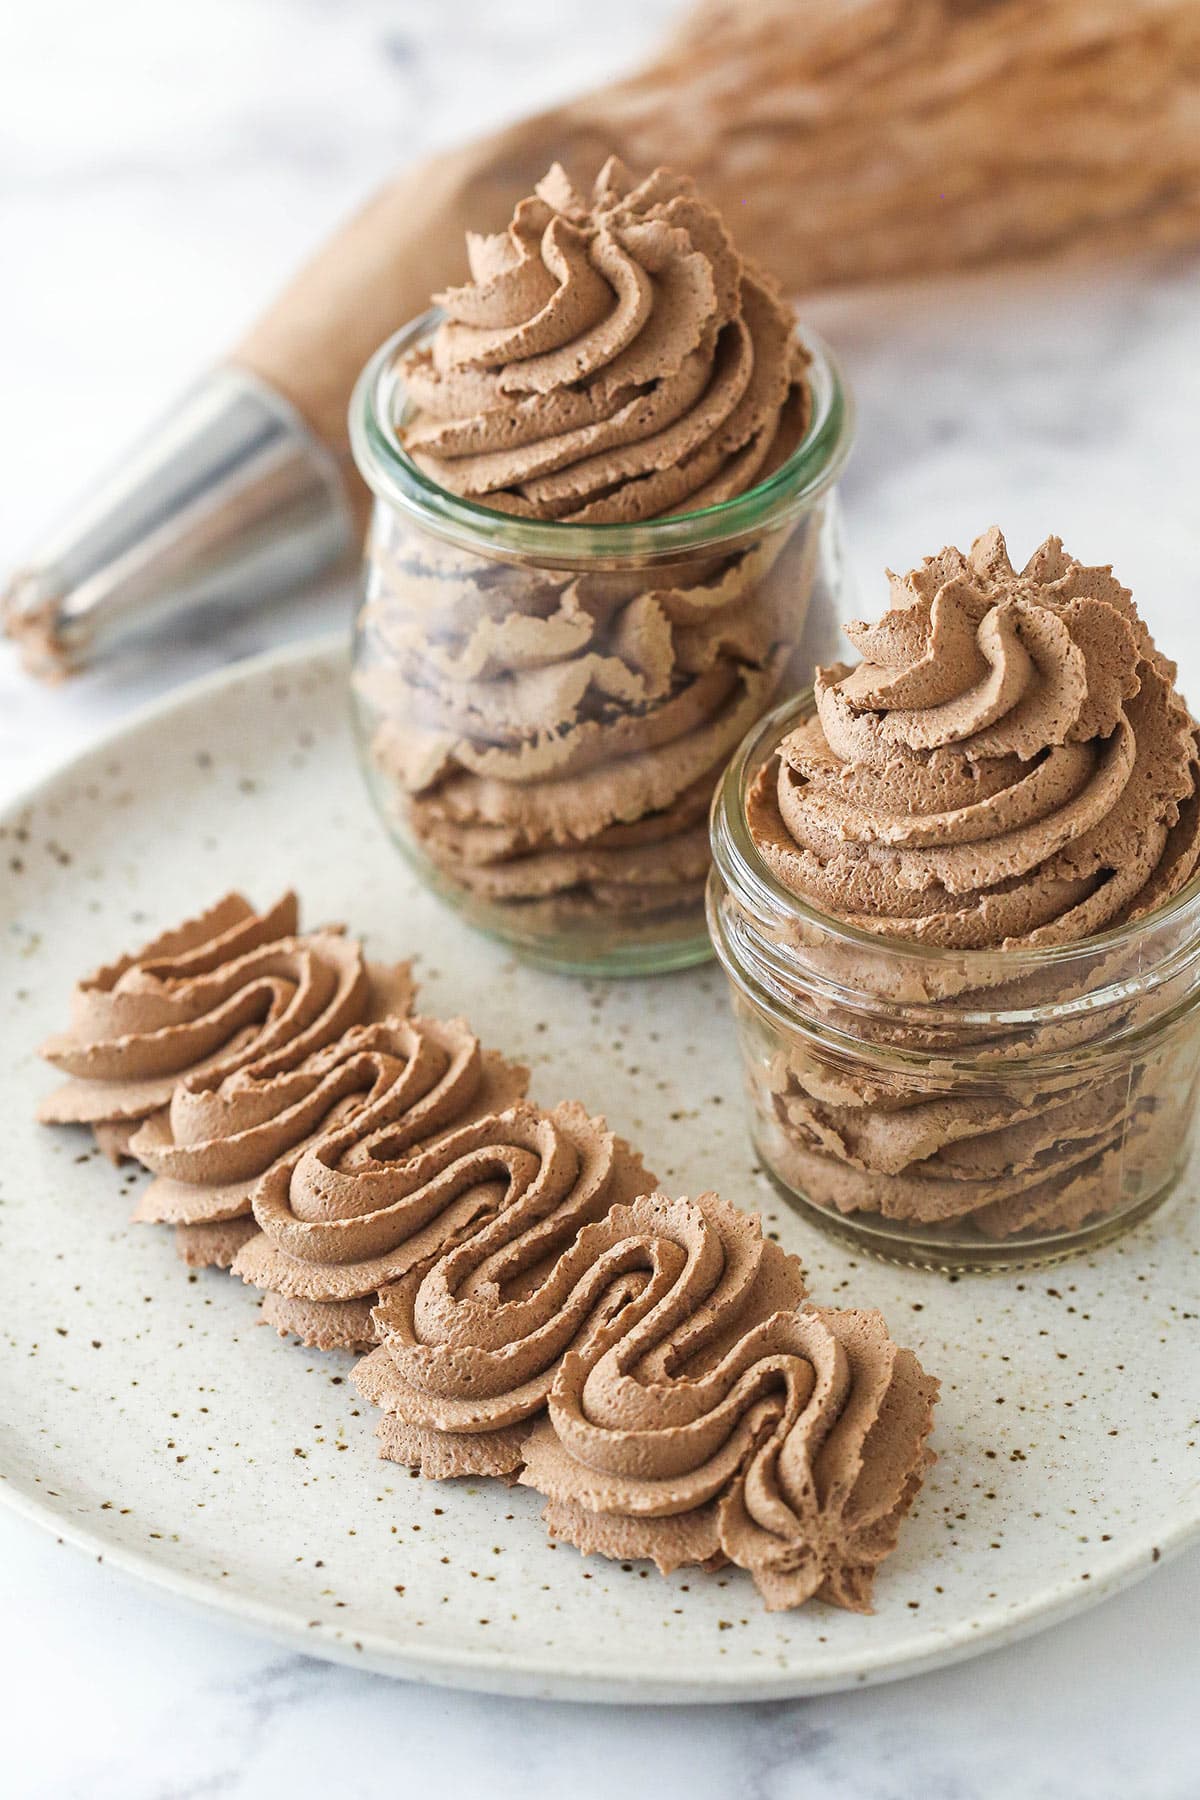 Chocolate whipped cream in jars and piped onto a plate.